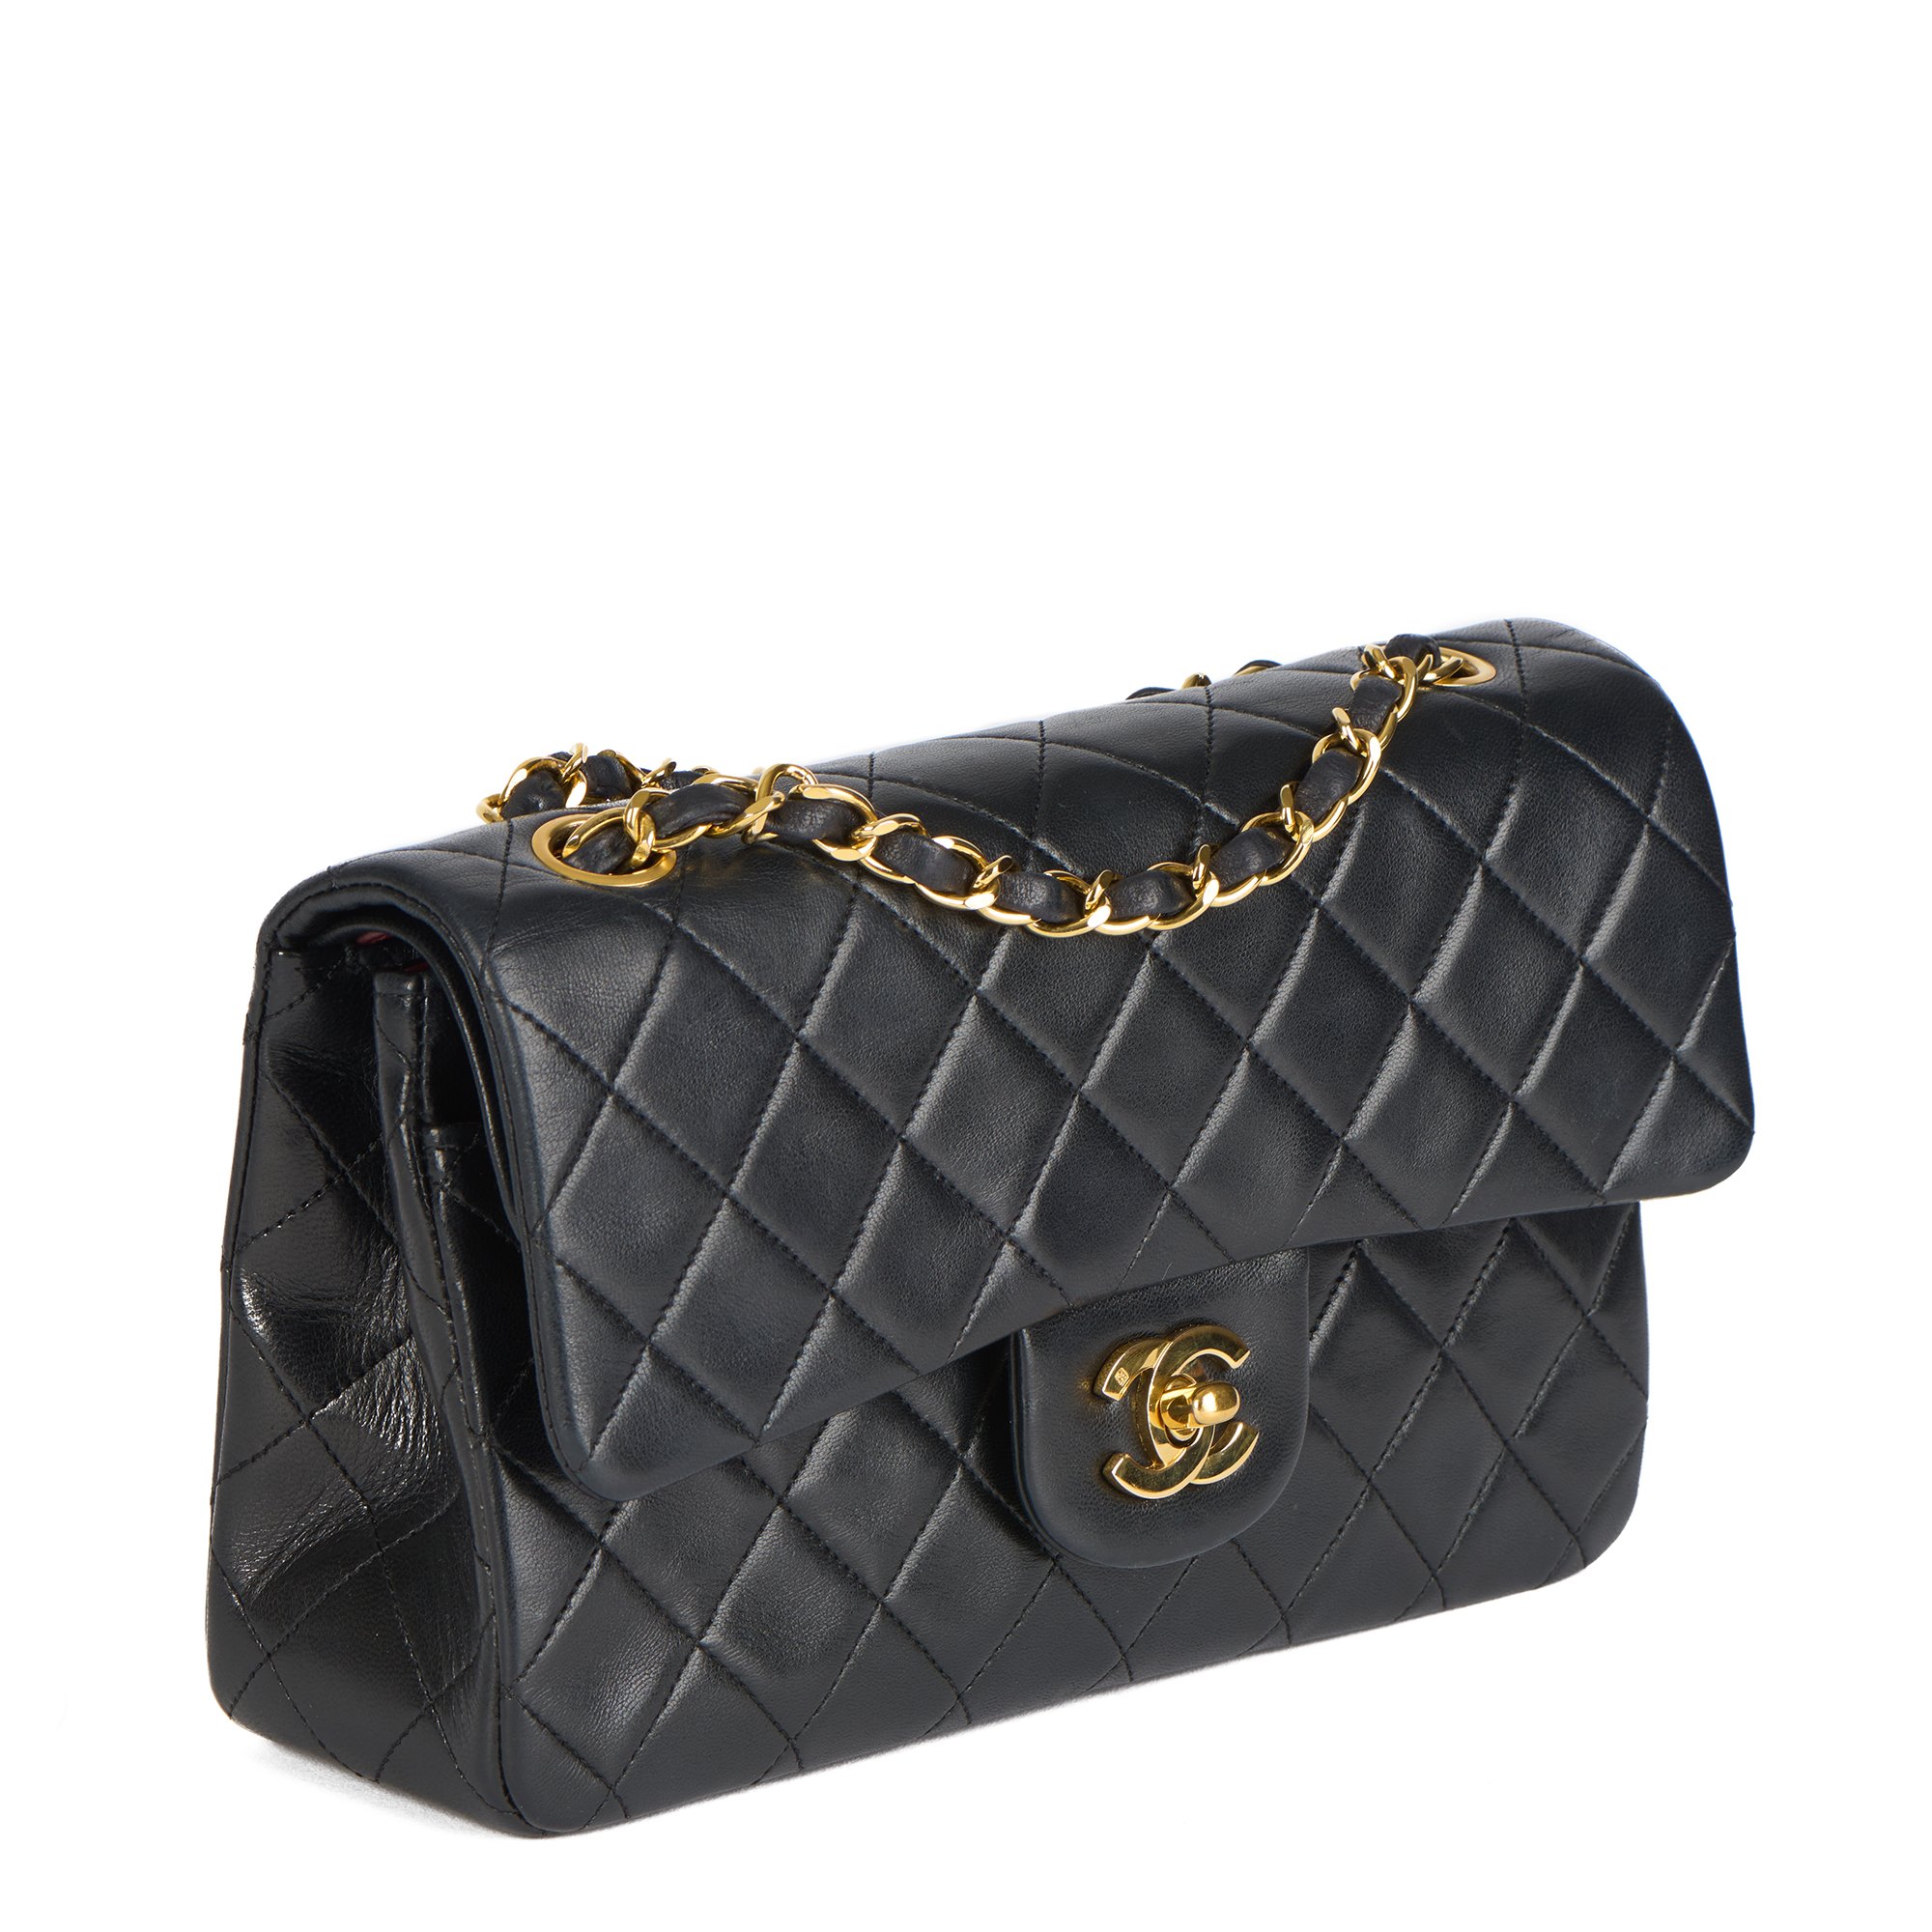 Chanel Black Quilted Lambskin Vintage Small Classic Double Flap Bag